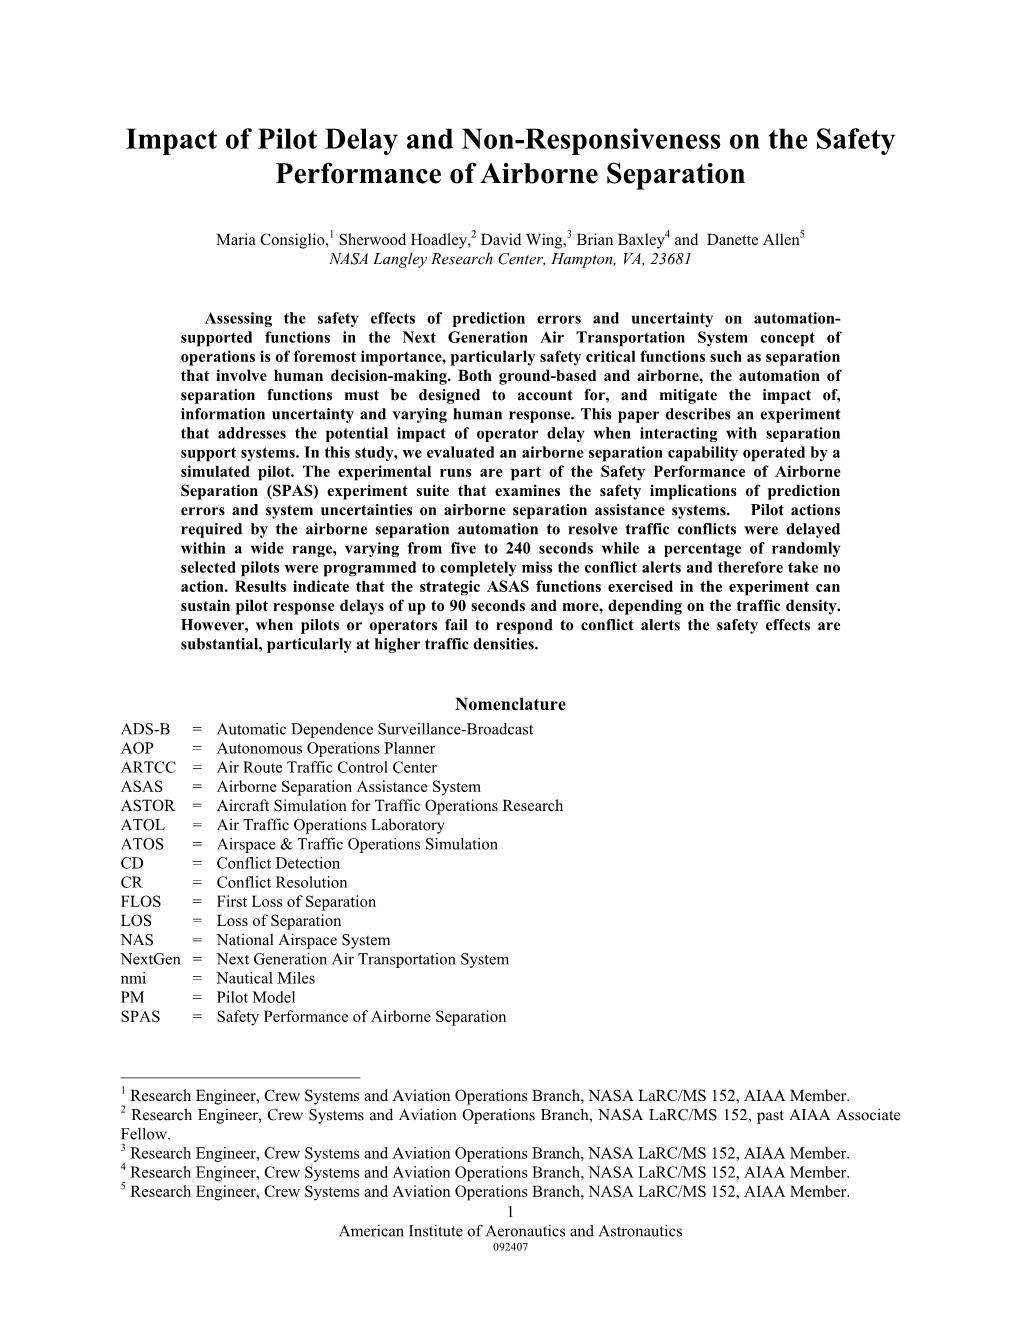 Impact of Pilot Delay and Non-Responsiveness on the Safety Performance of Airborne Separation